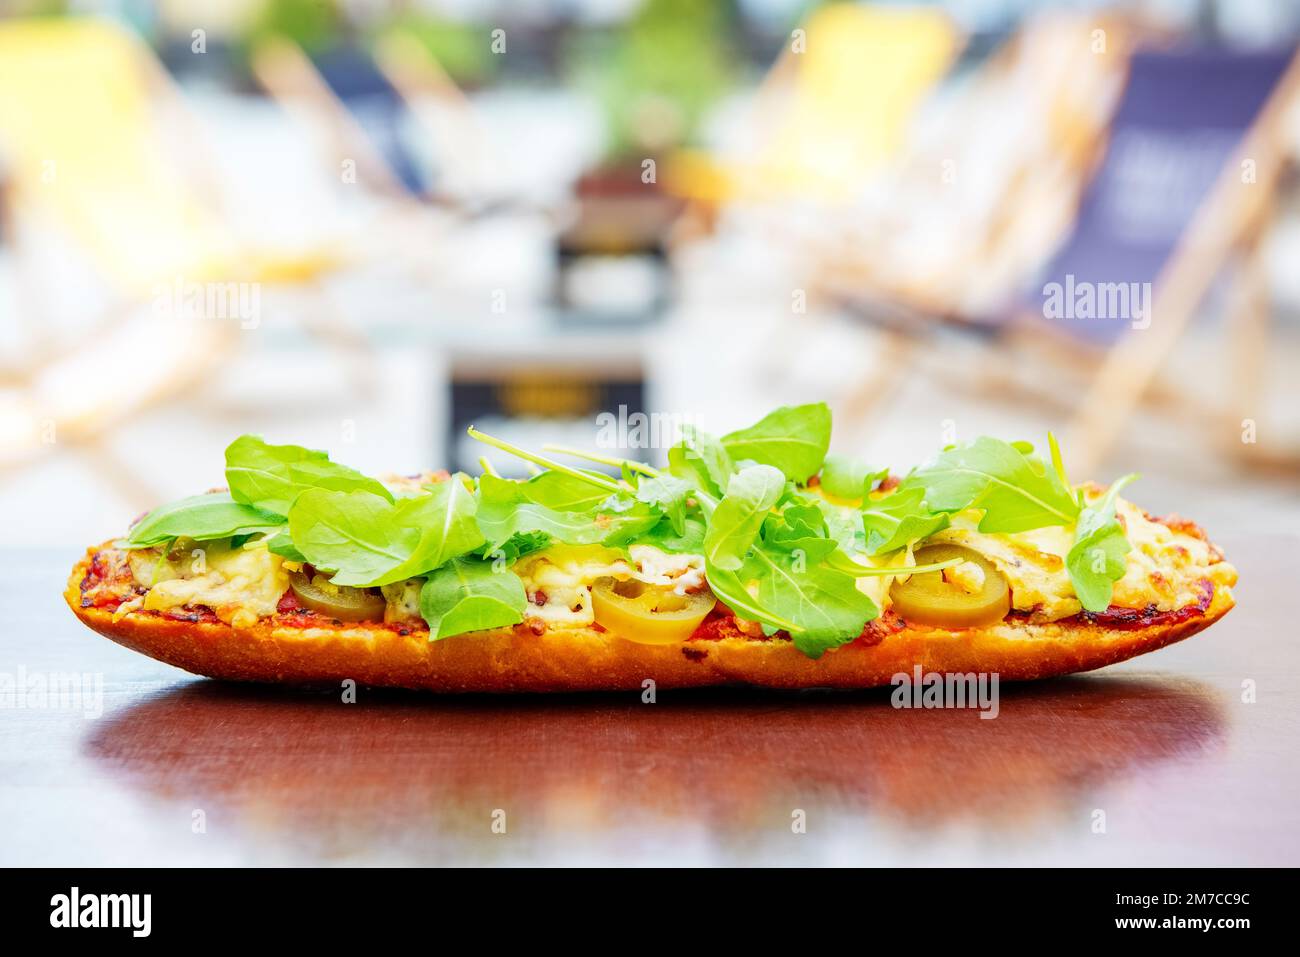 baguette with tomato sauce, meat, jalapeno and arugula baked with cheese on a table outdoor. popular street fast food Stock Photo